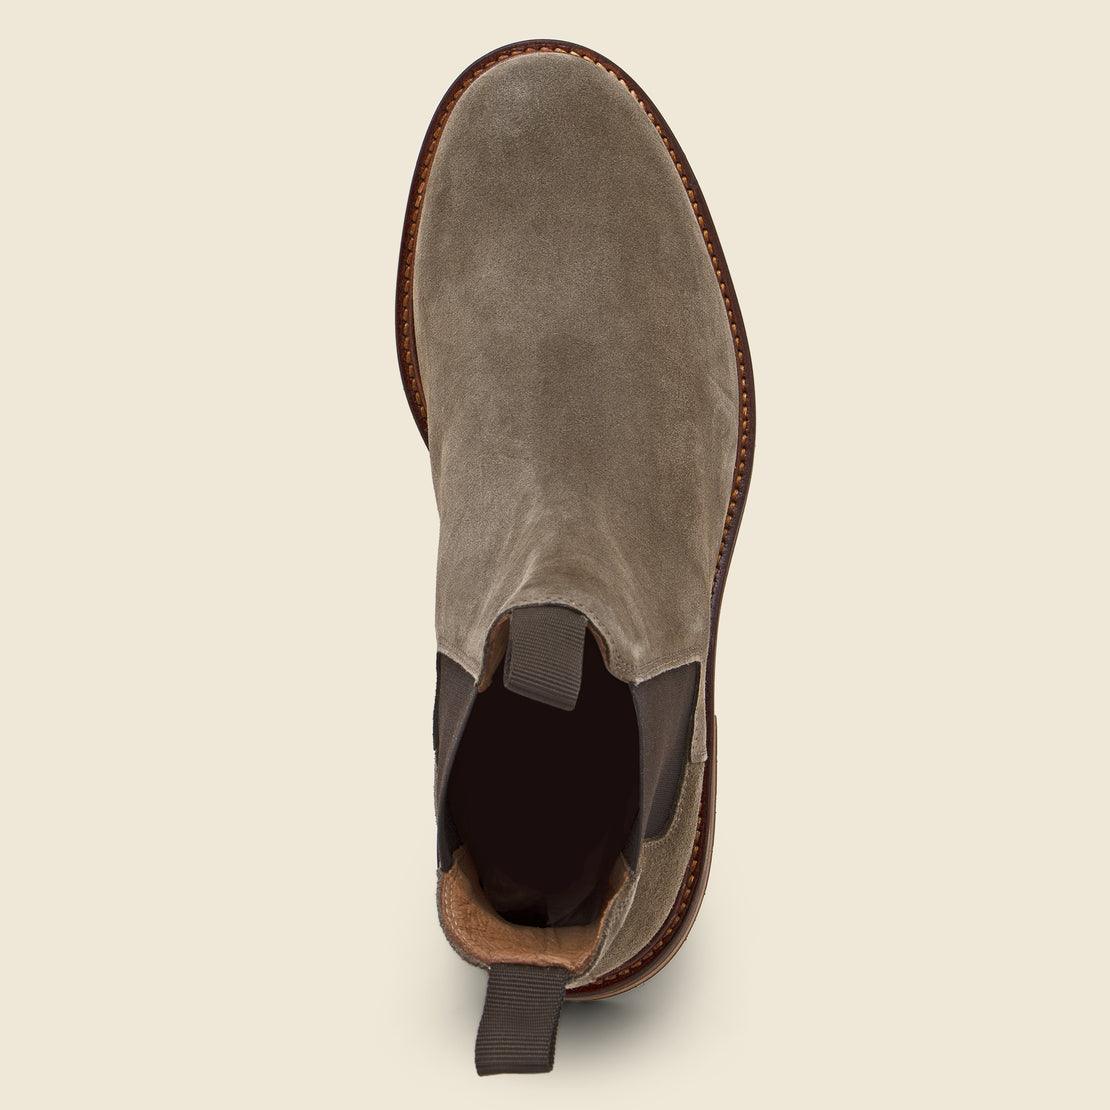 York Suede Chelsea Boot - Khaki - Shoe the Bear - STAG Provisions - Shoes - Boots / Chukkas